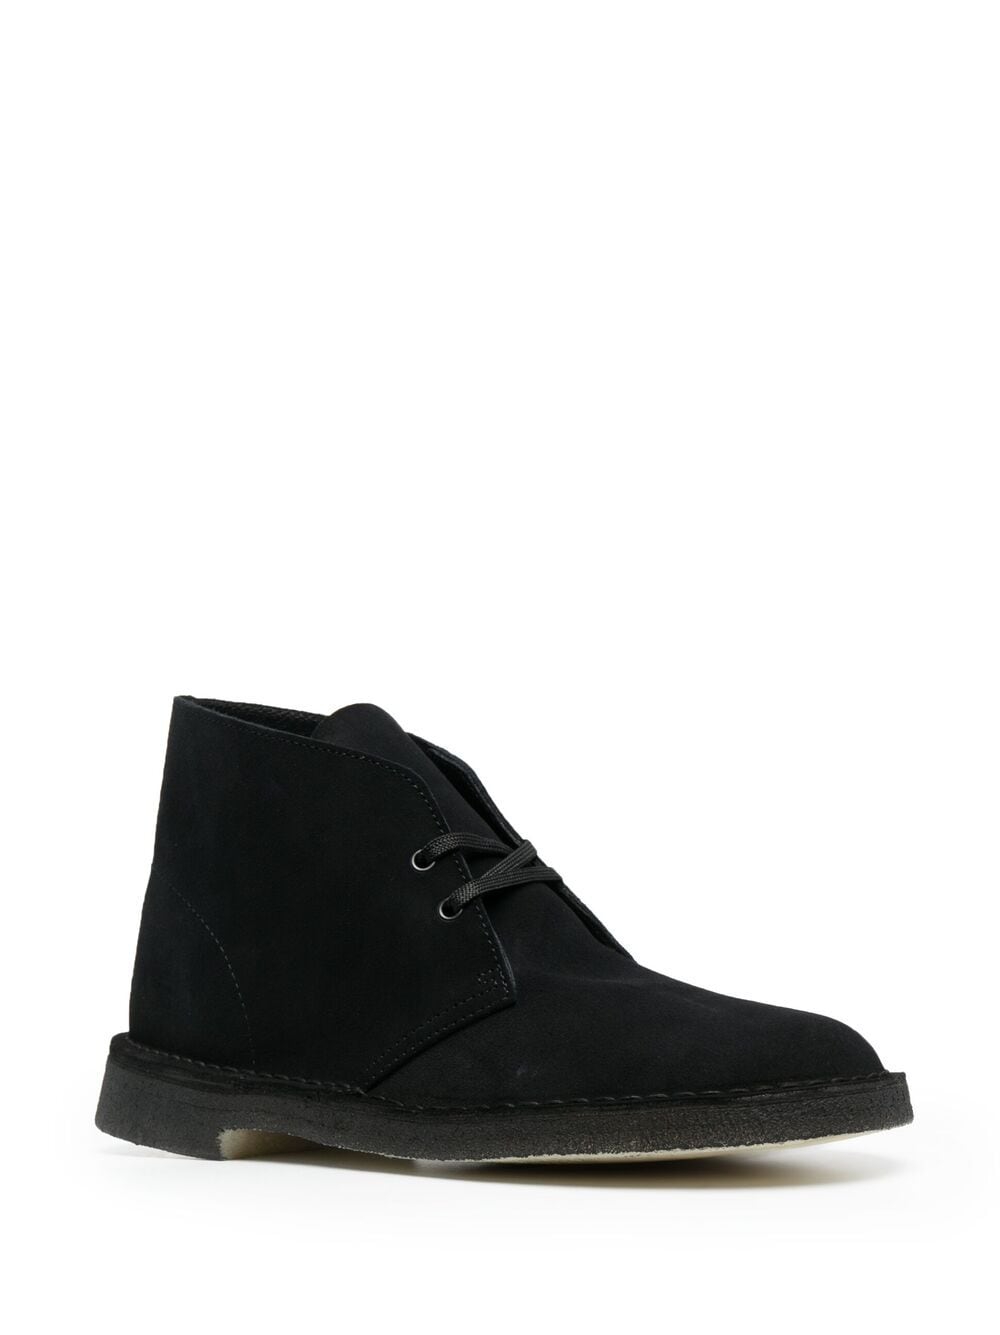 CLARKS CLARKS- Suede Ankle Boot